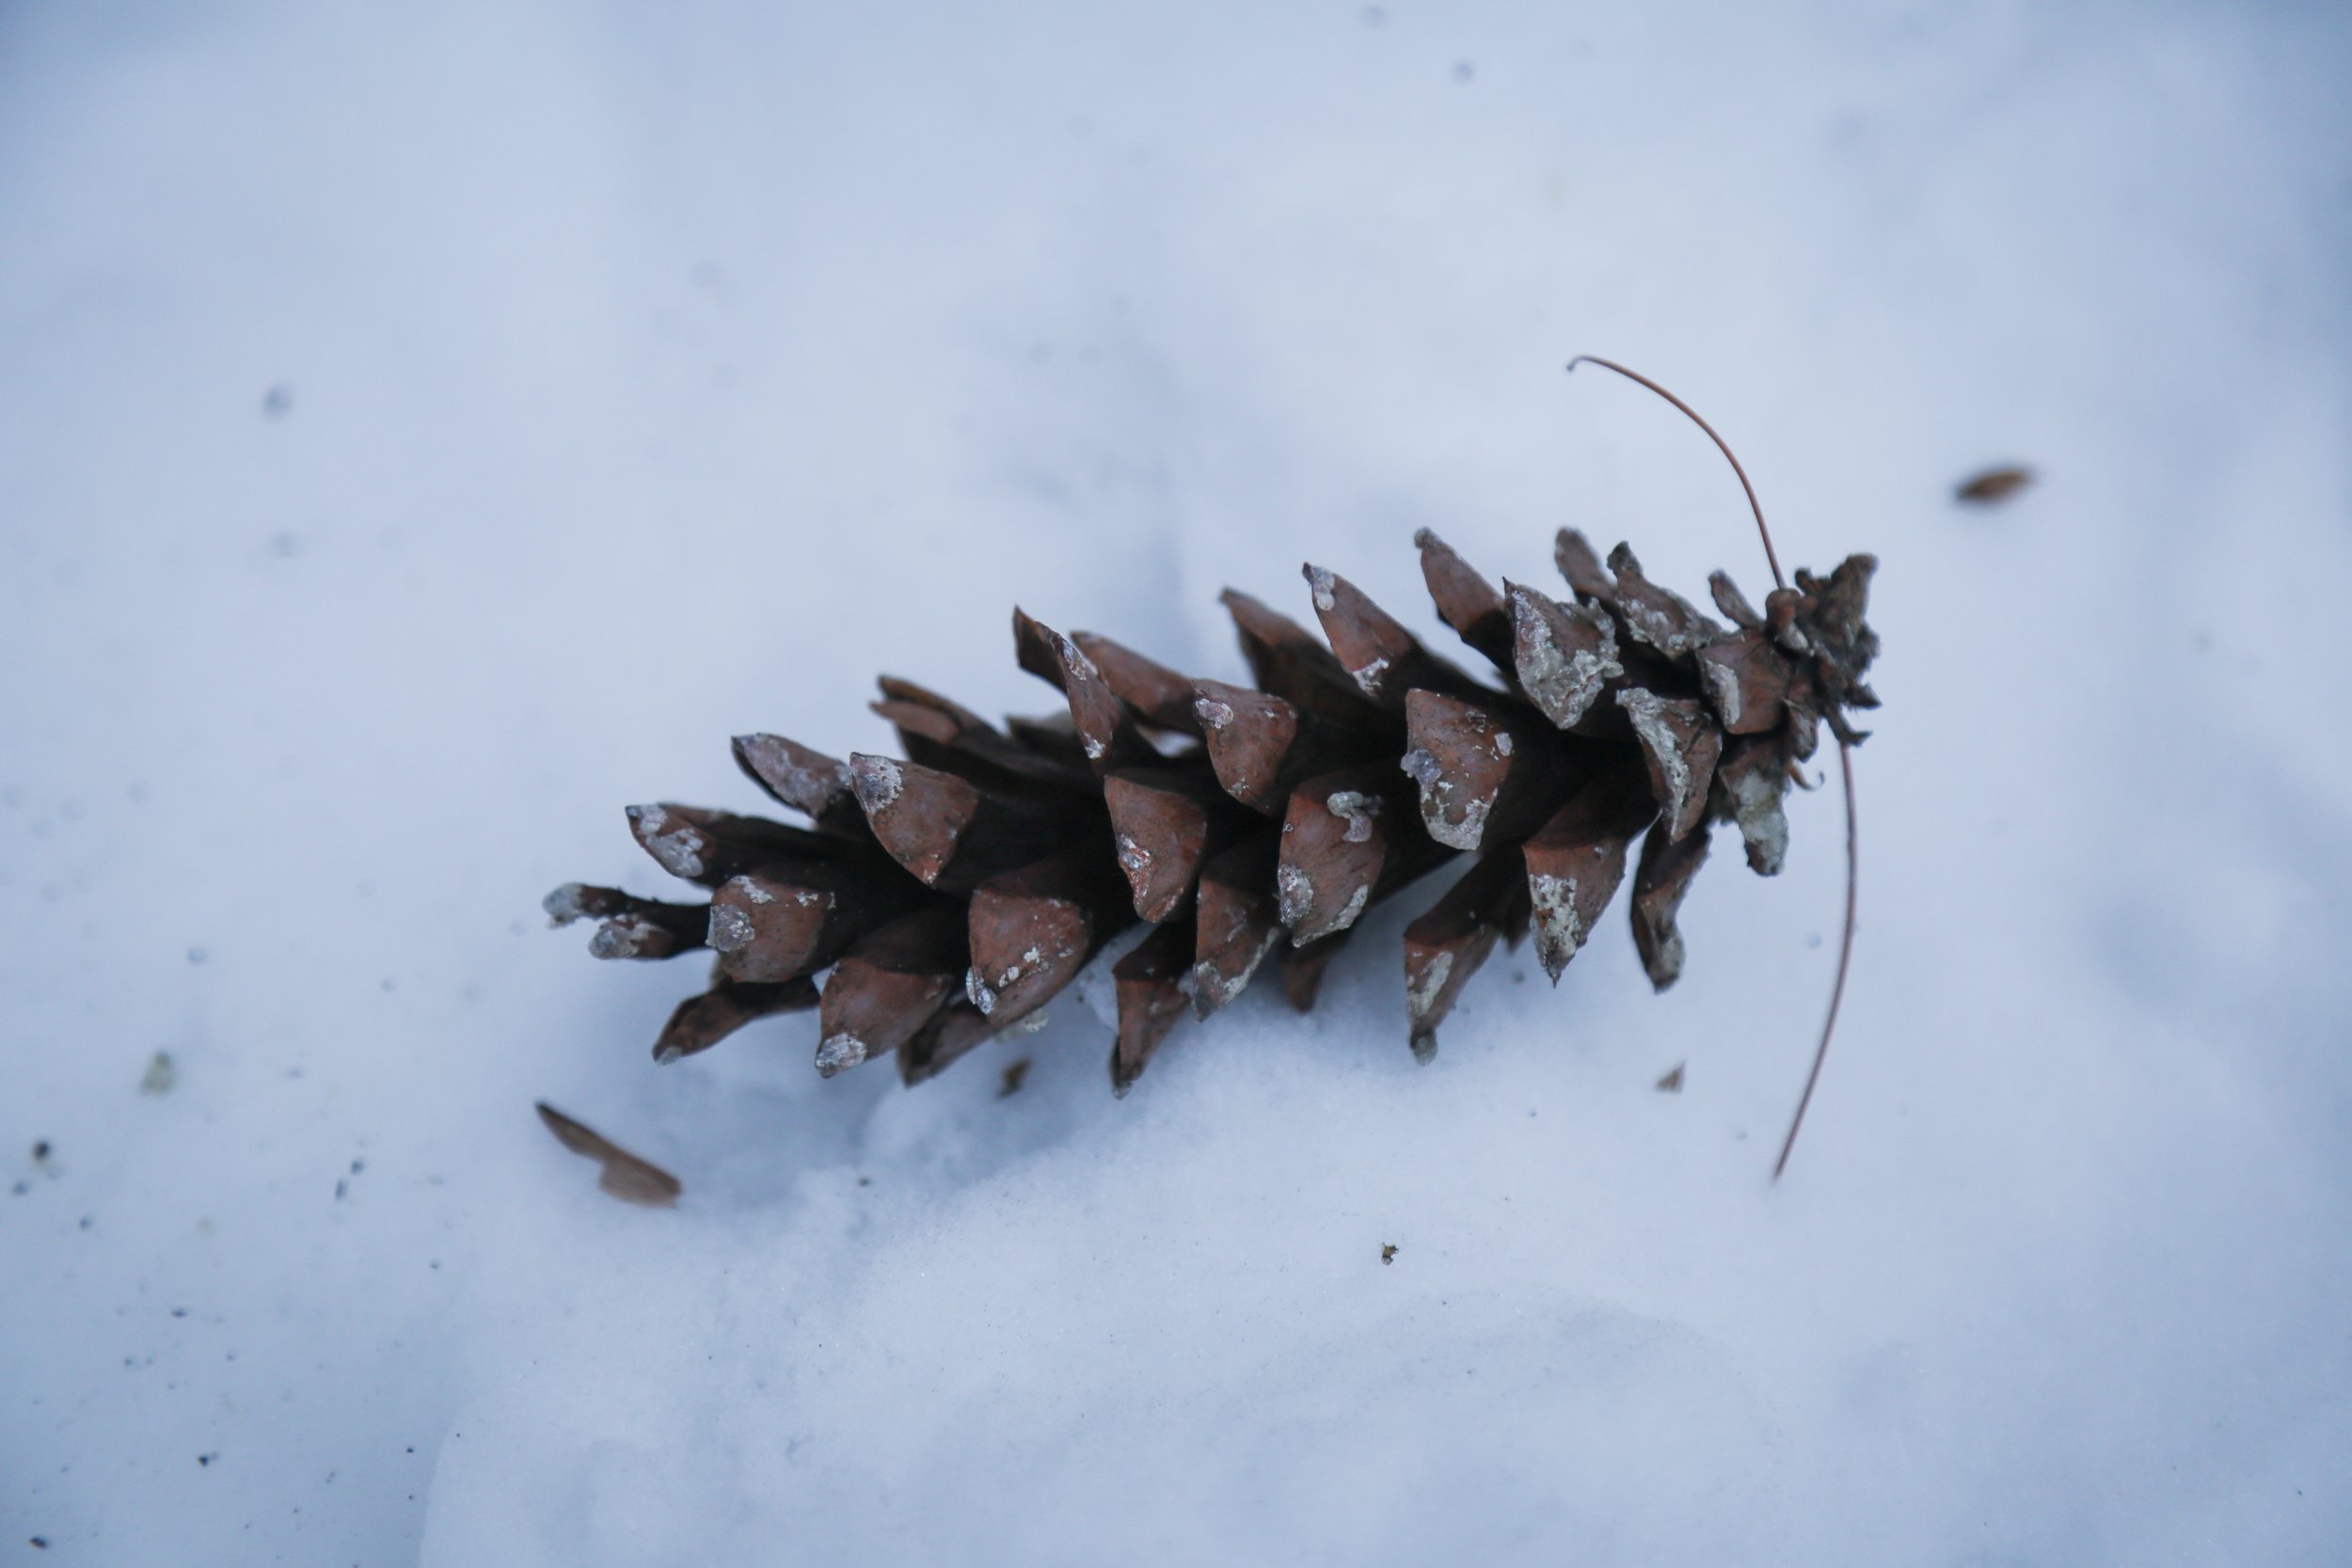  Pine cone in the snow. 